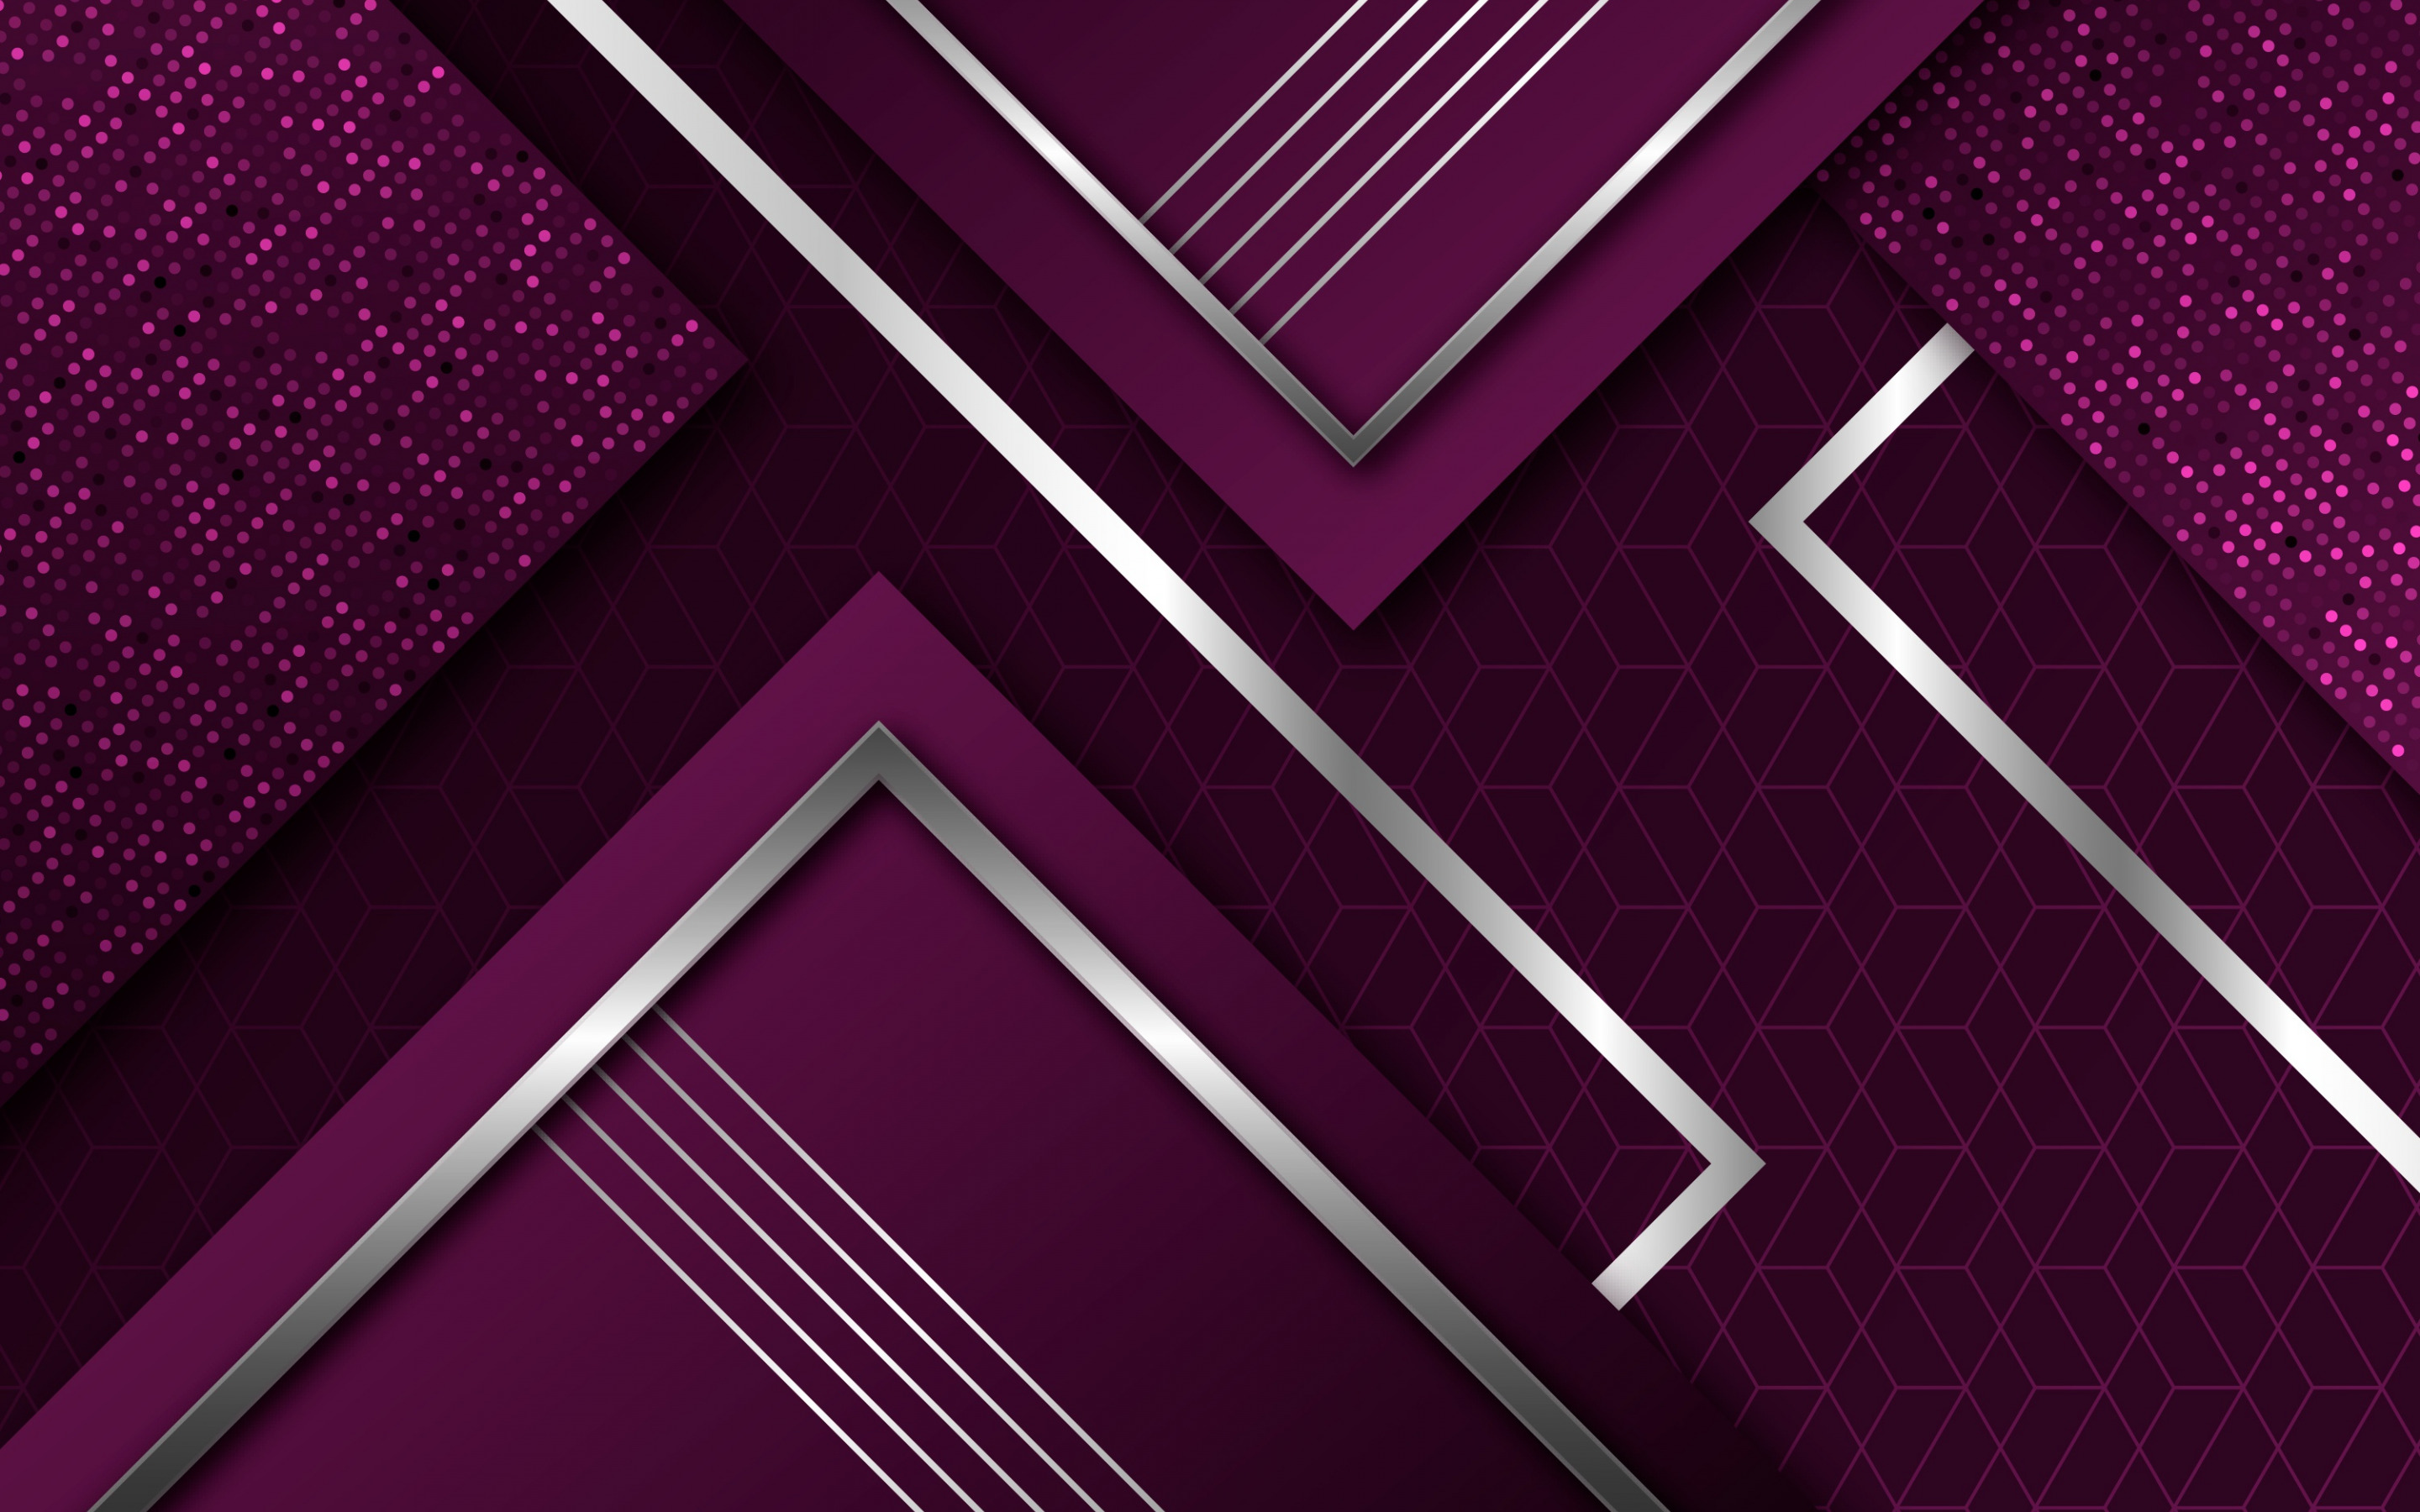 Download wallpapers purple abstract background, luxury purple background,  geometric backgrounds, material design, creative purple backgrounds for  desktop with resolution 2880x1800. High Quality HD pictures wallpapers